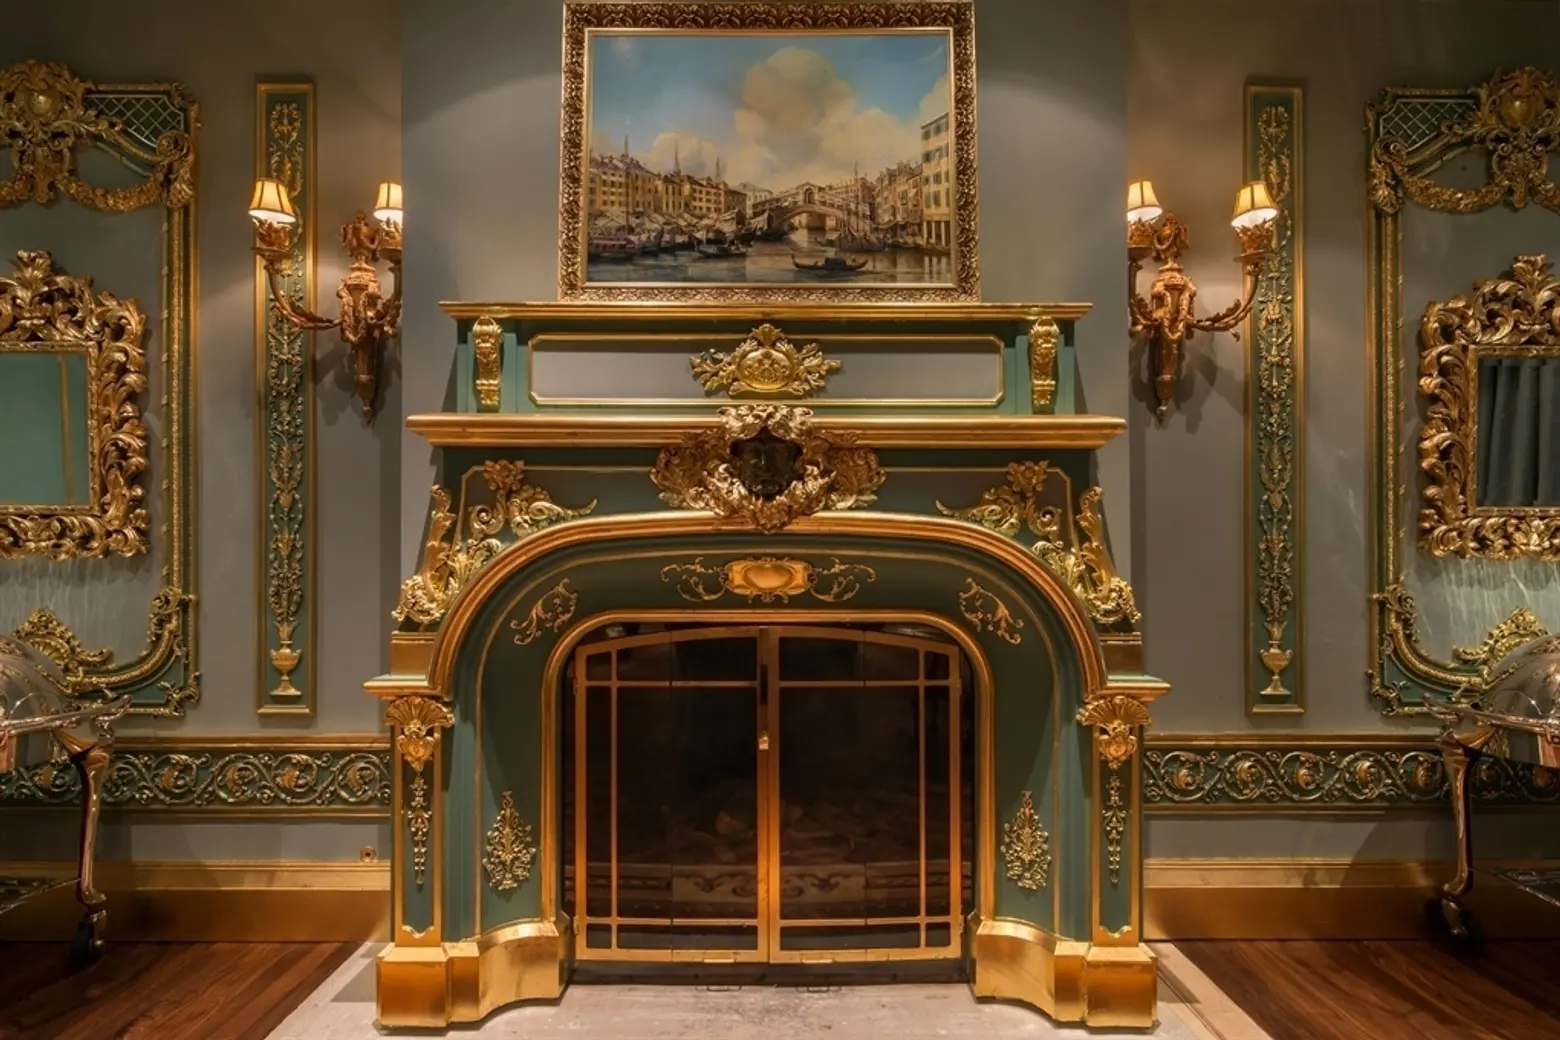 12 East 69th Street, Vincent and Teresa Viola, NYC mansions, Upper East Side mansions, biggest NYC houses, most expensive NYC real estate listings, gilded fireplace